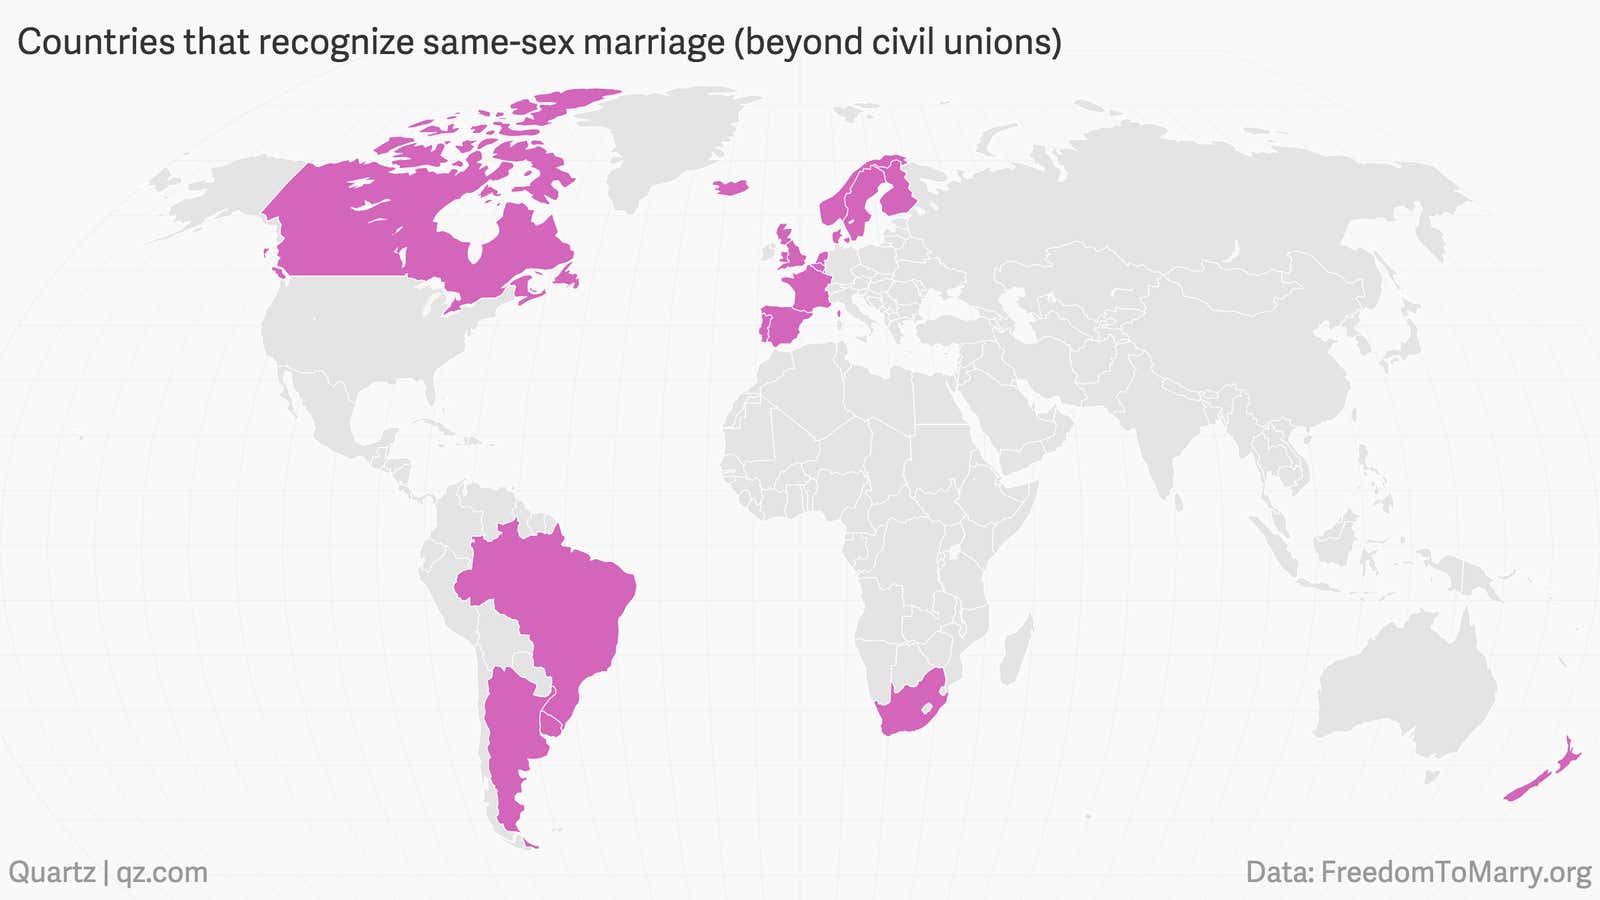 Note: Though same-sex marriage is recognized in England, Scotland, and Wales; it remains unrecognized in Northern Ireland.